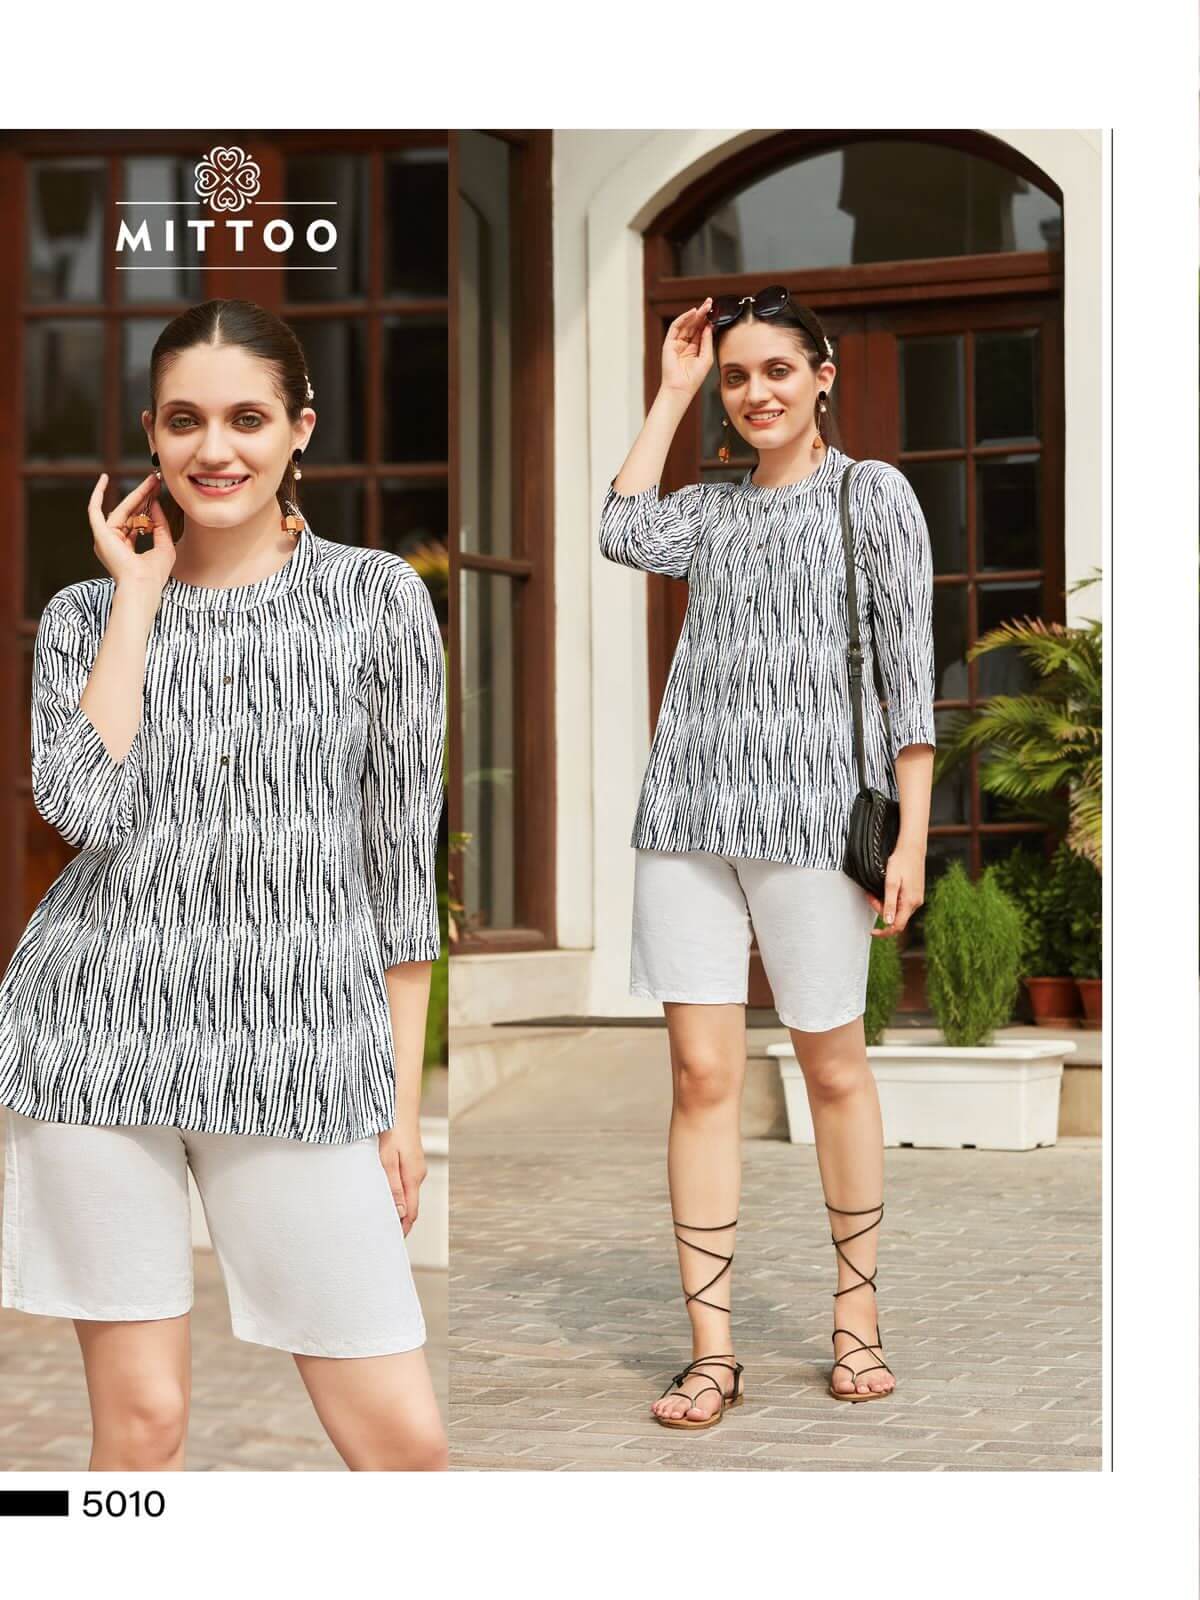 Mittoo Victoria Vol 2 Ladies Tops Catalog at Wholesale collection 6